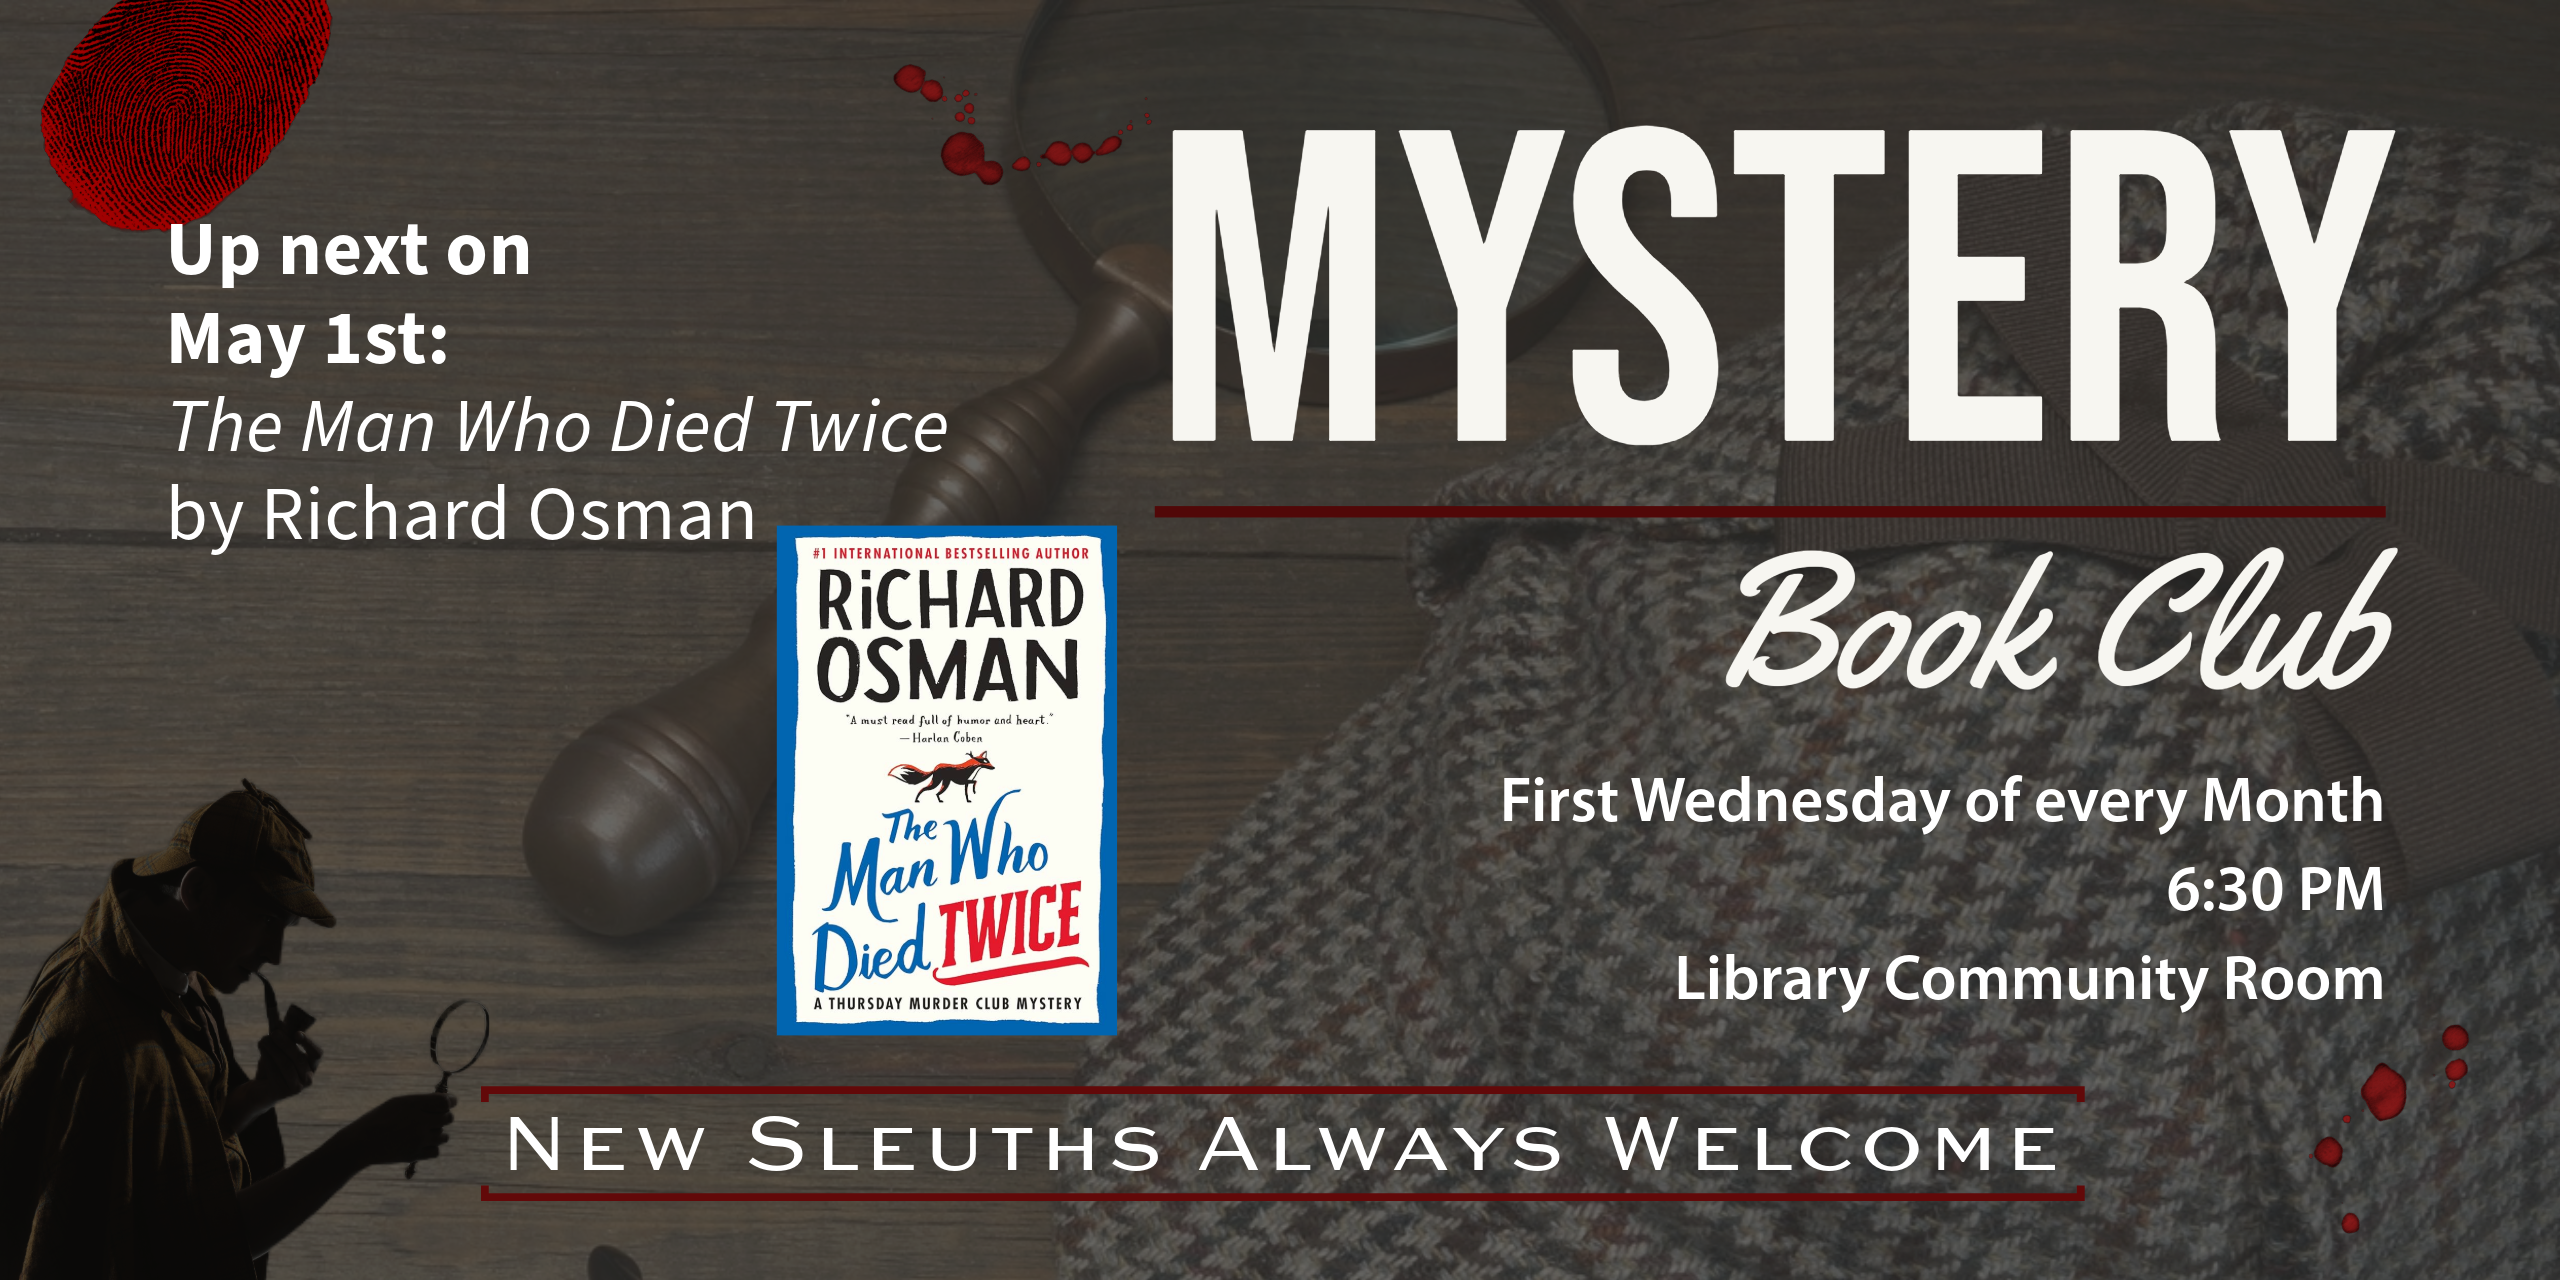 Mystery Book Club meets the first Wednesday of every month at 6:30 in the Library Community Room.  Up next is May 1, where we'll discuss "The Man Who Died Twice" by Richard Osman